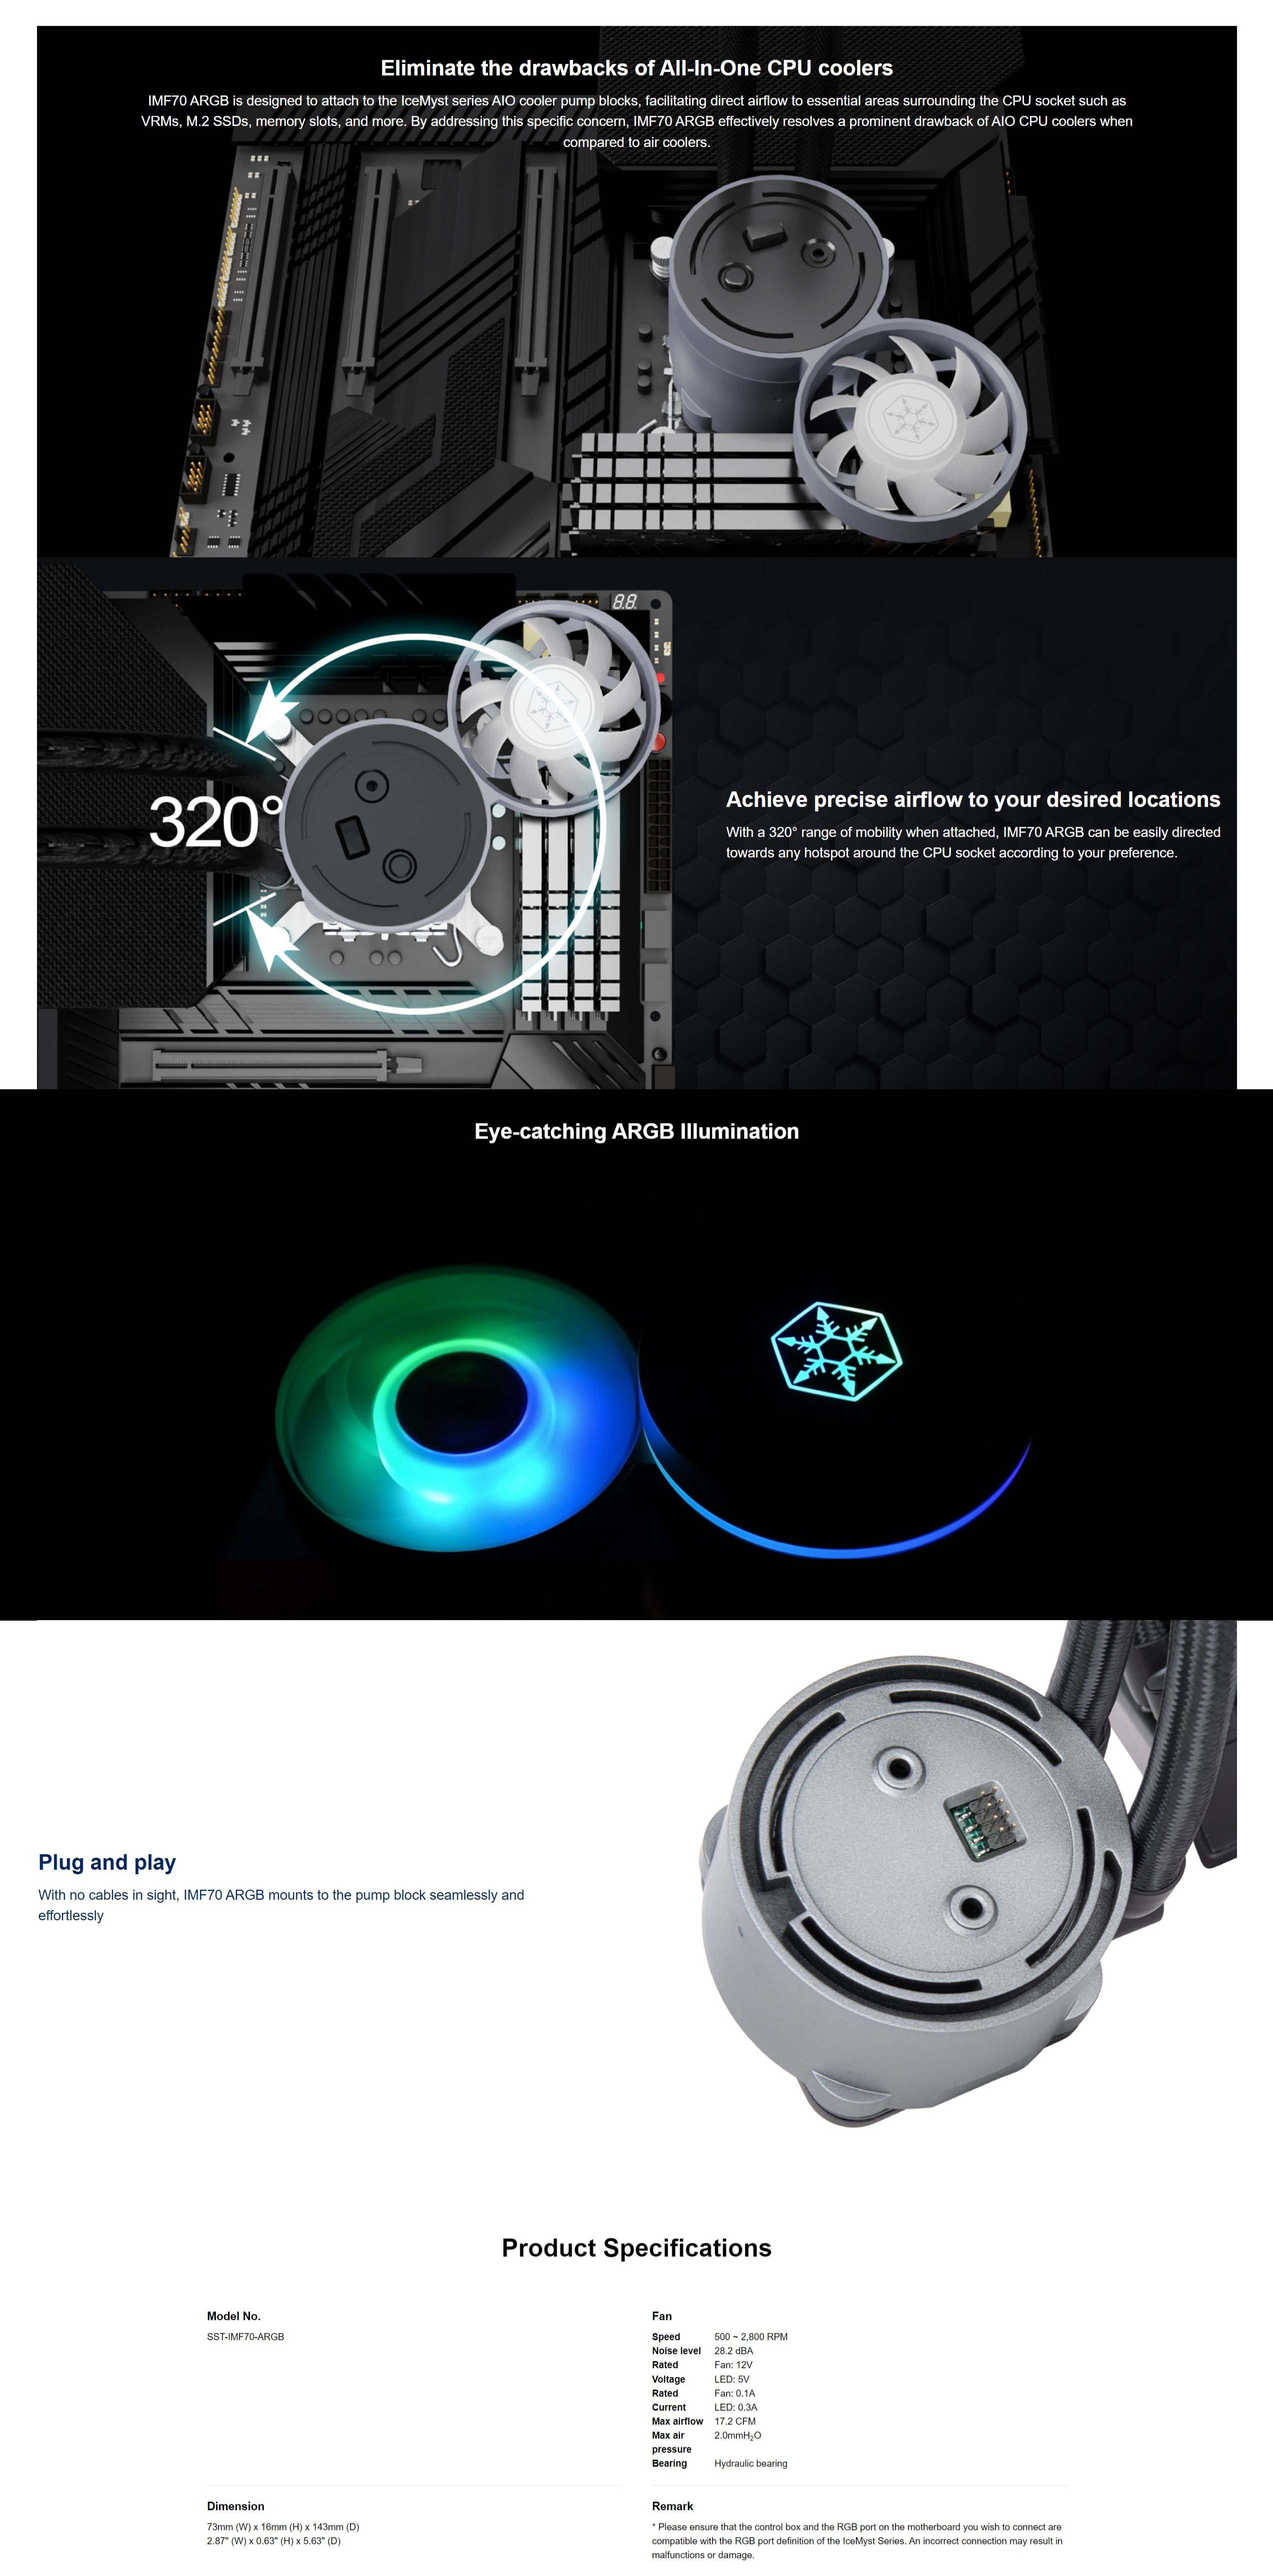 A large marketing image providing additional information about the product SilverStone IMF70-ARGB IceMyst Liquid CPU Cooler Upgrade Kit - Additional alt info not provided